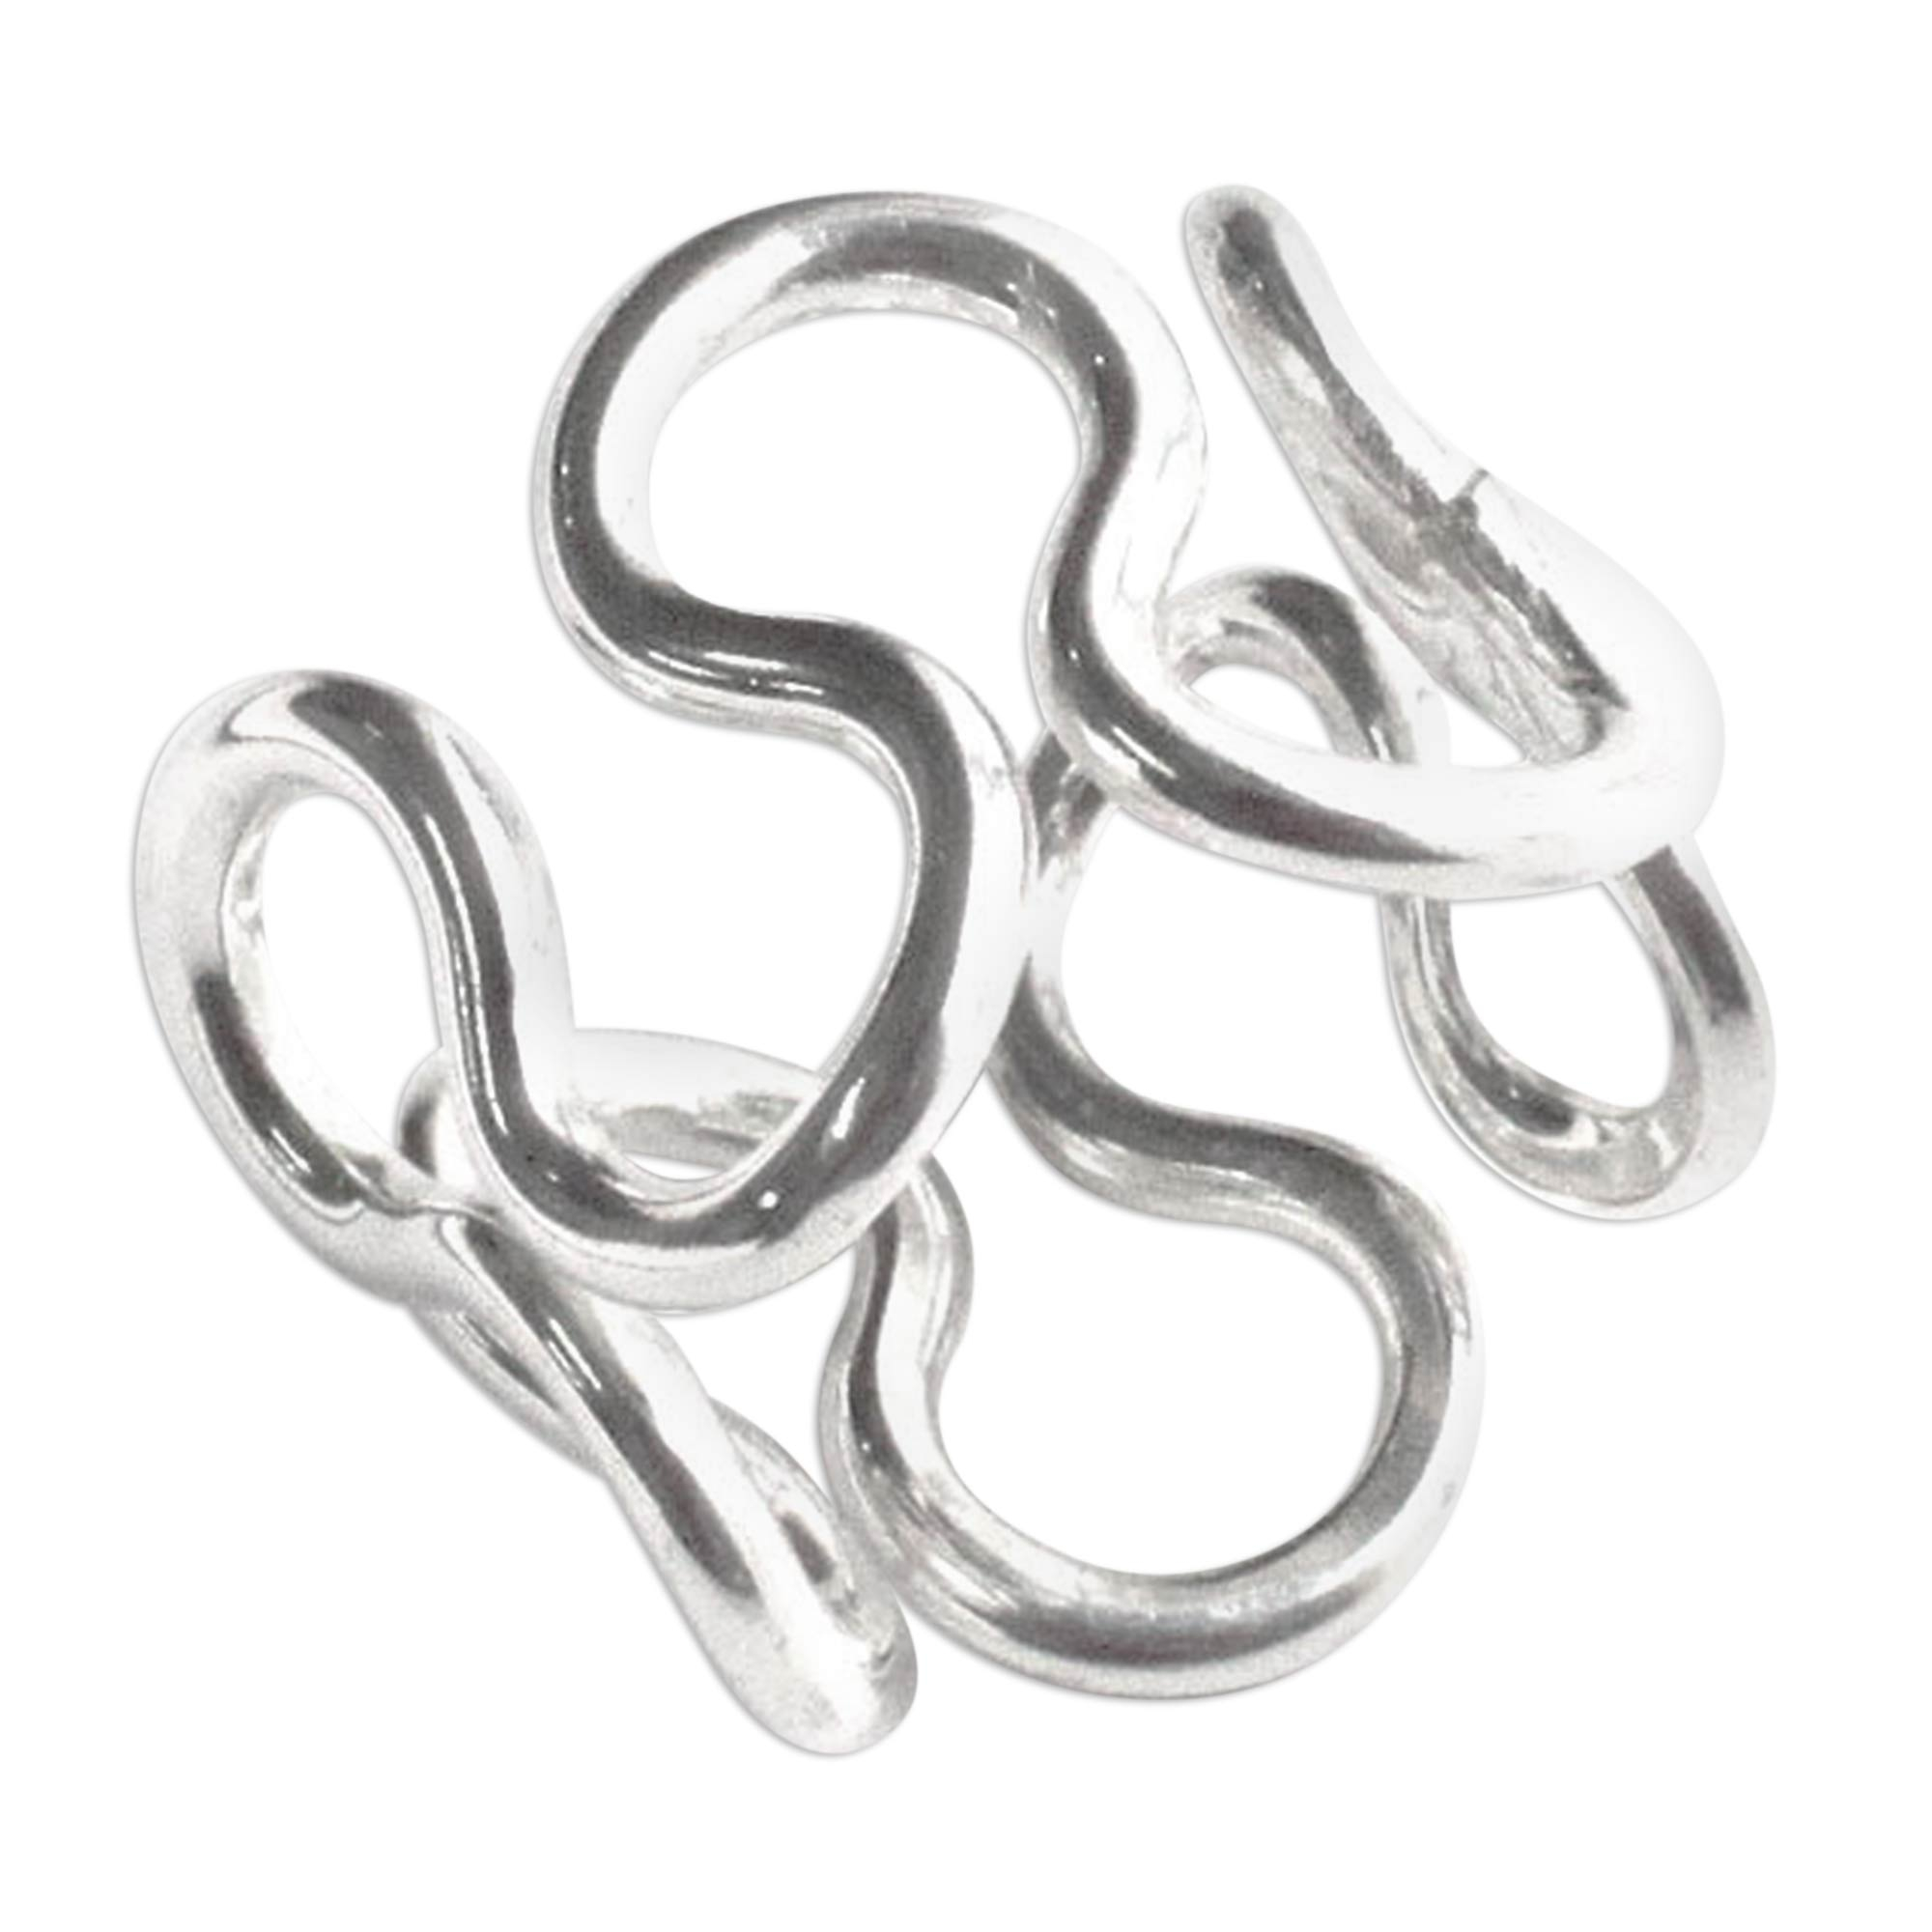 Handmade Modern Fine Silver Band Ring - Sinuous | NOVICA